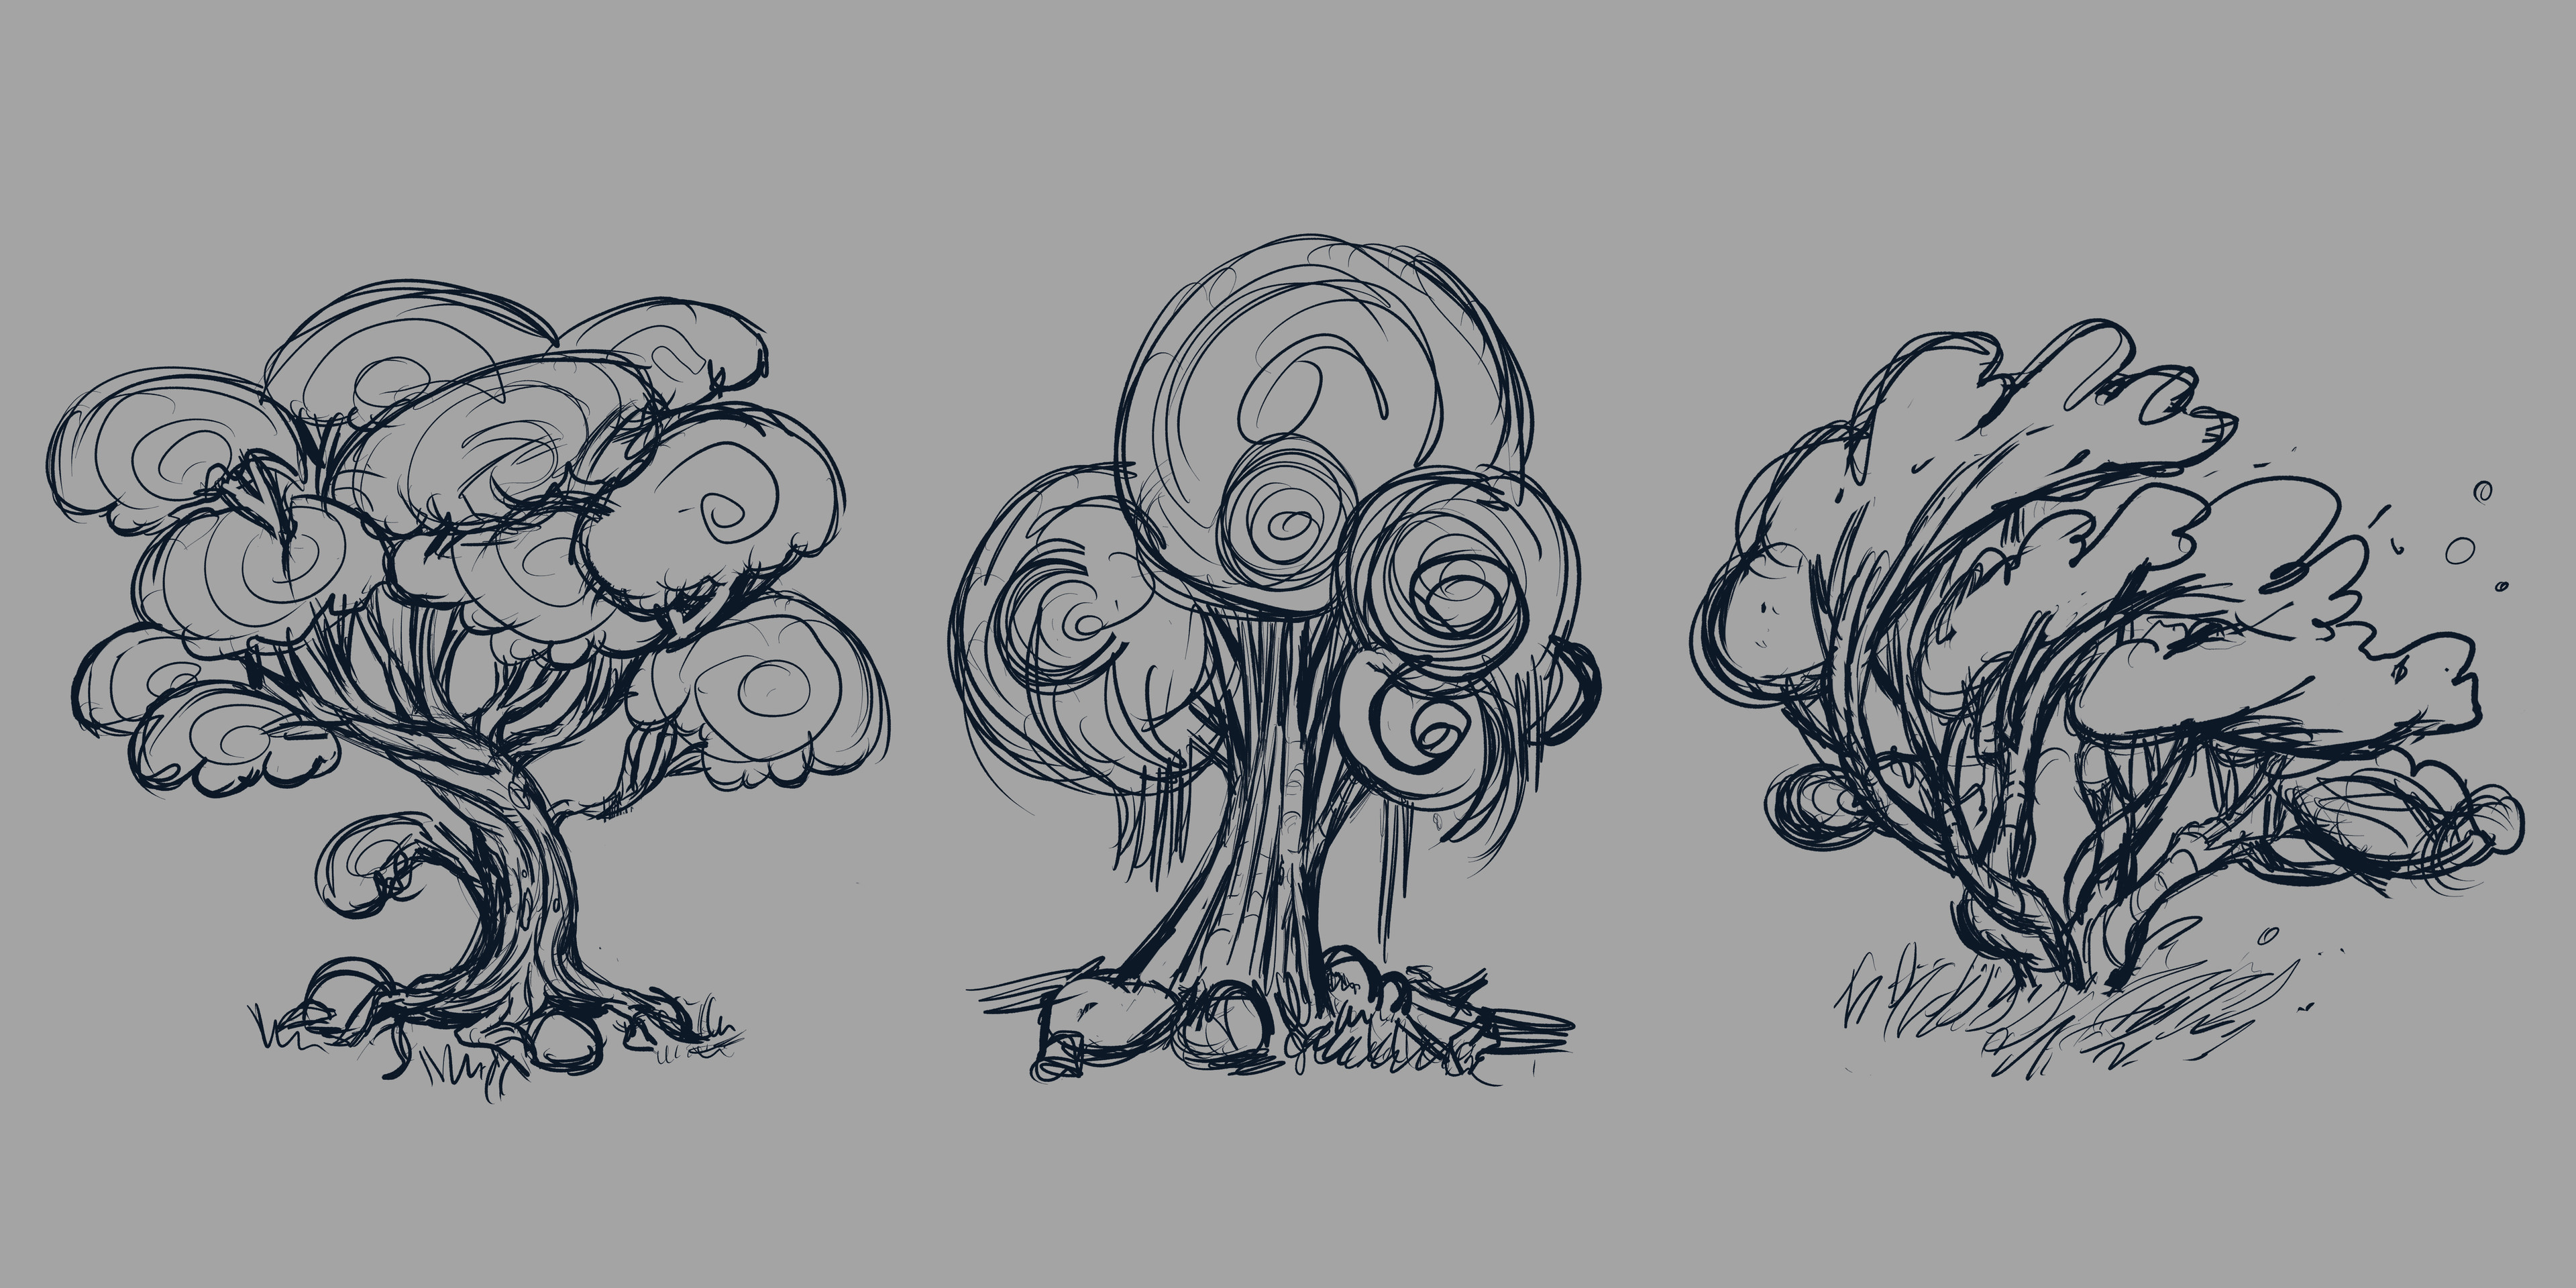 More detailed sketch for trees number 5, 11 and 16